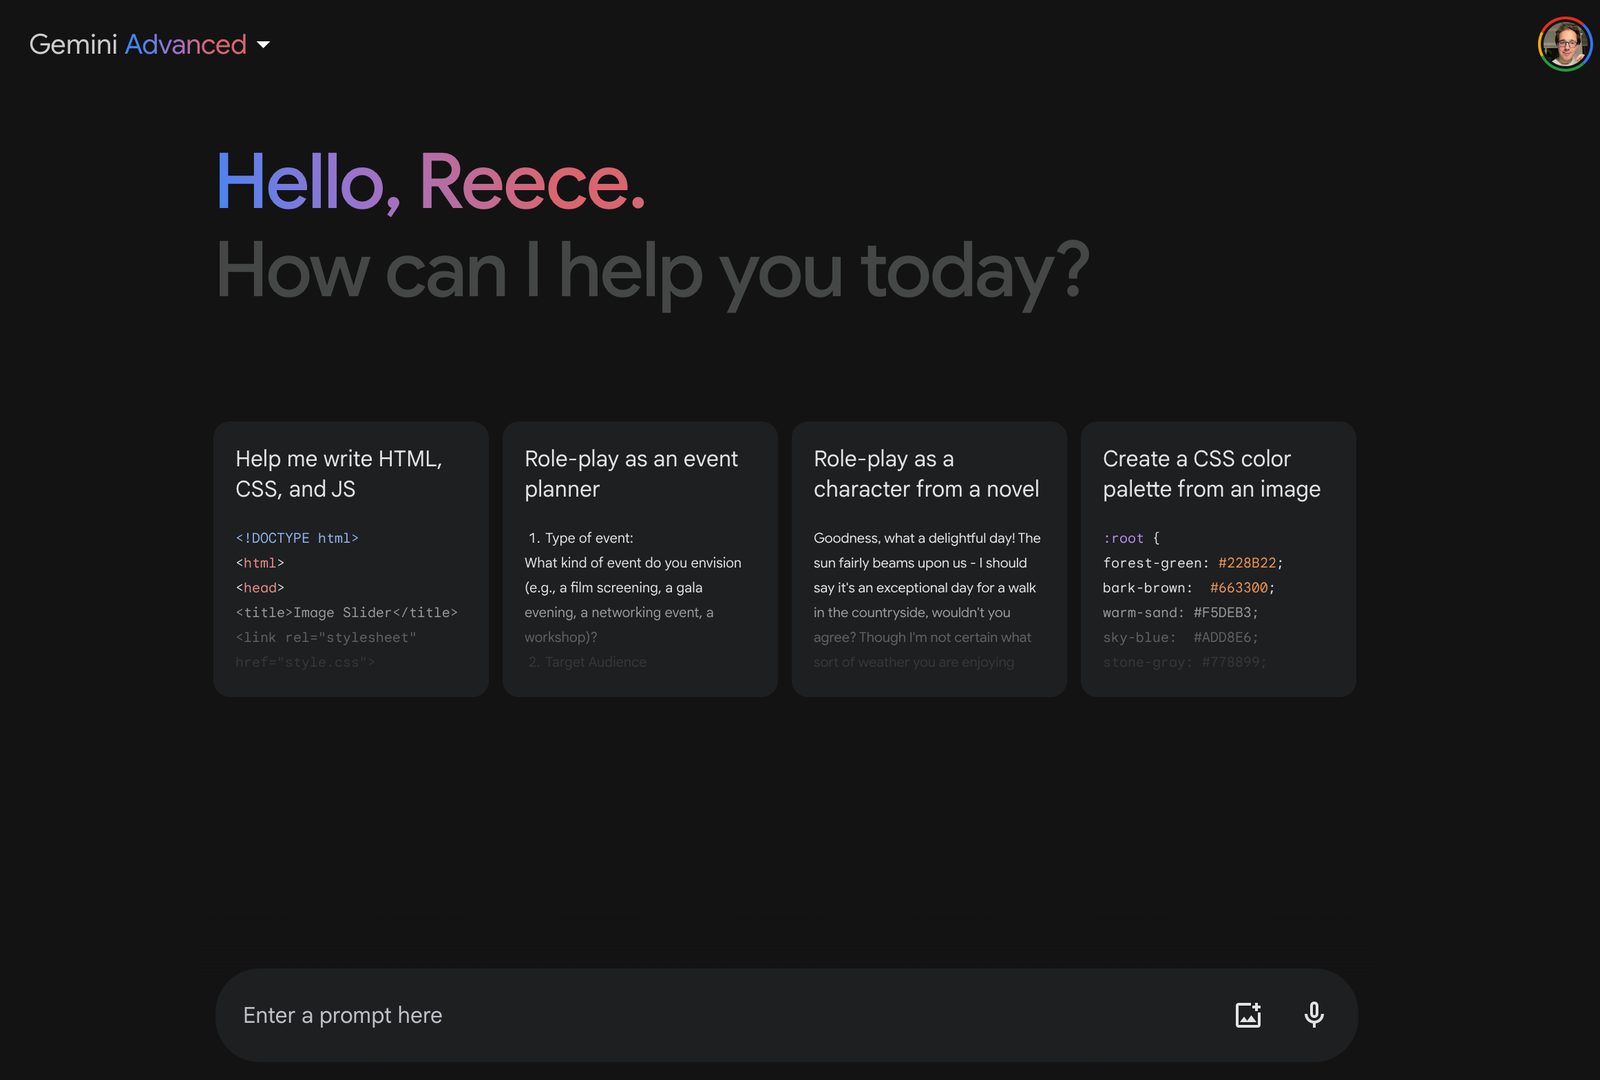 A screenshot of the Google Gemini Advanced prompt page a black screen with the personalized greeting Hello Reece in...